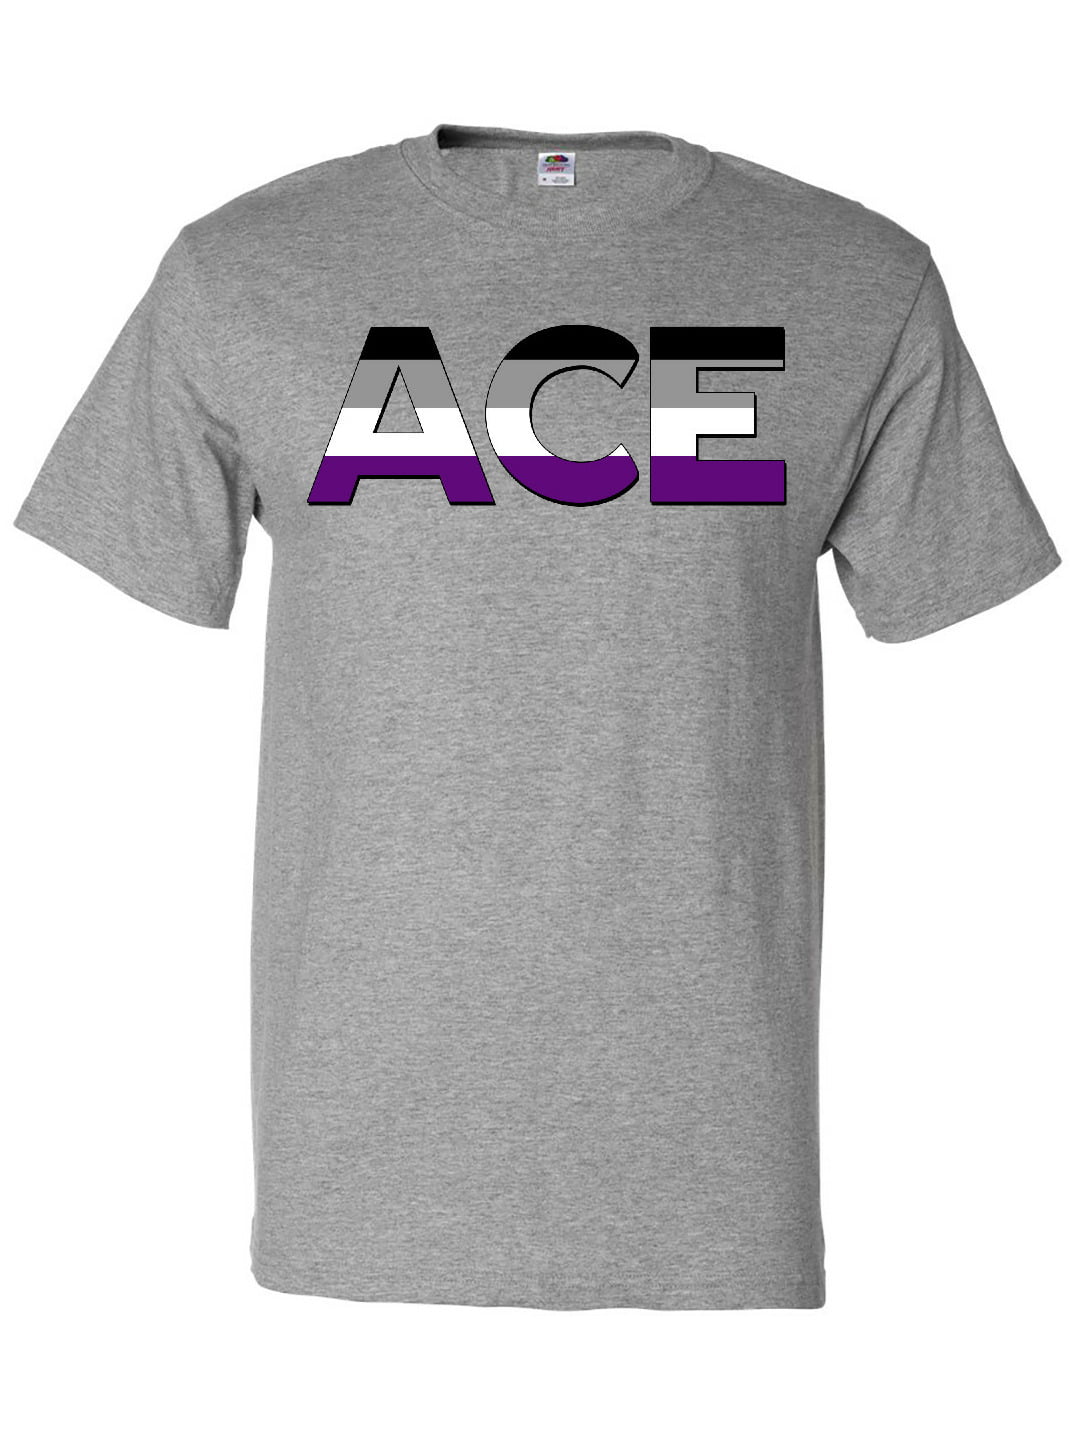 Ace And Awkward T-Shirt  Asexual Pride  Ace Shirt  Ace Pride Shirt  Asexual Shirt  Asexual Dragon  Ace And Awkward  Queery Shirt